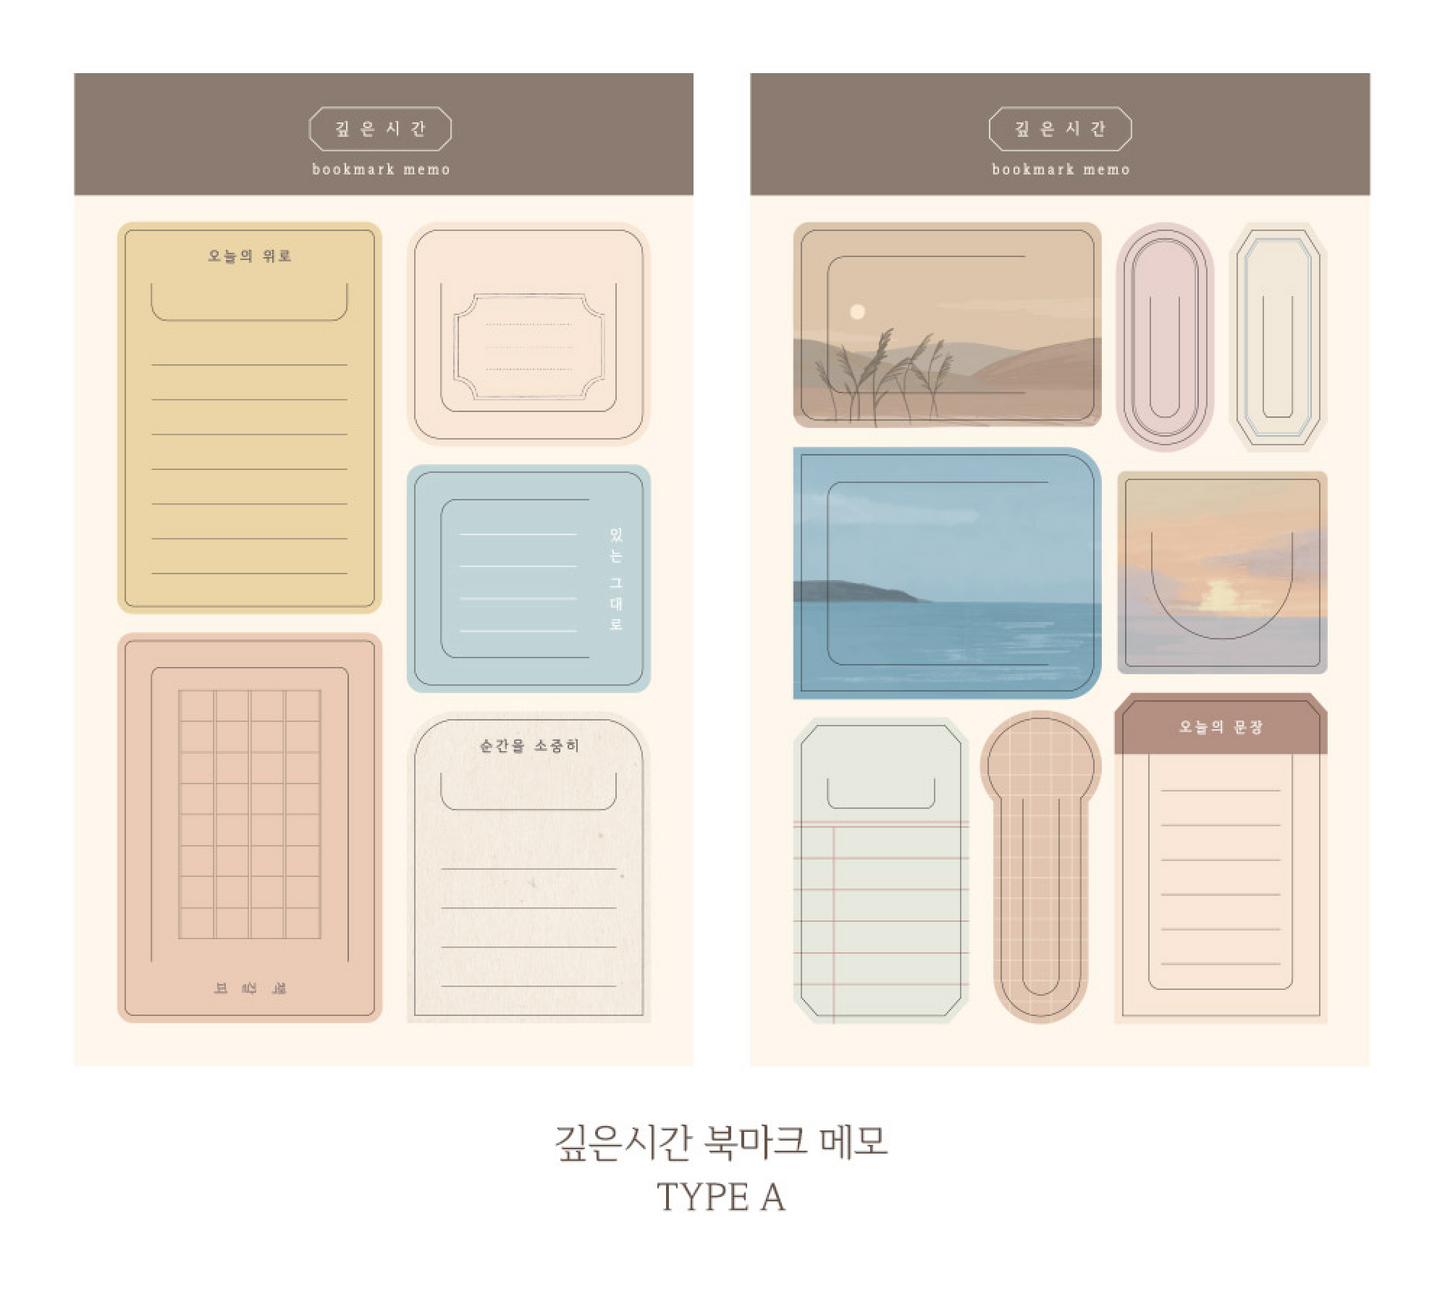 Meaningful Moments Memo-Bookmark Livework 1 Bookmark, Stationery, Memo Hunter & The Scholar